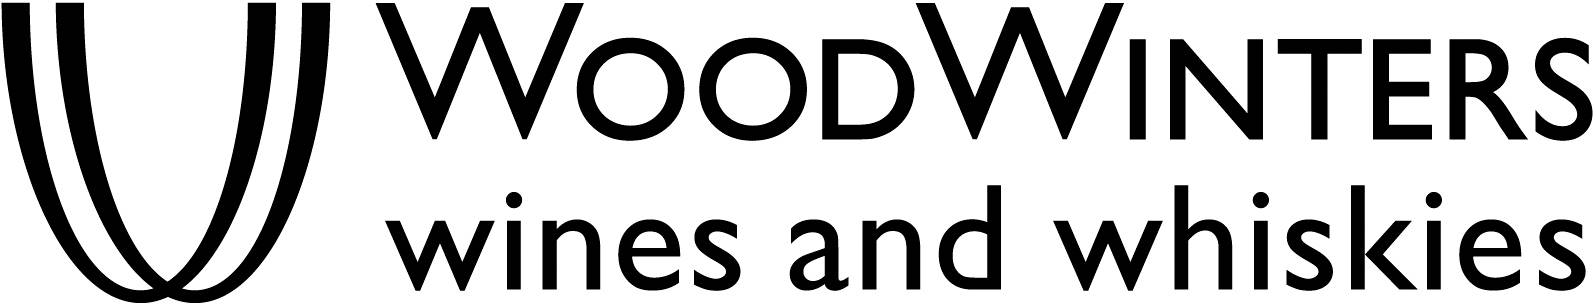 Woodwinters wines and whiskies logo